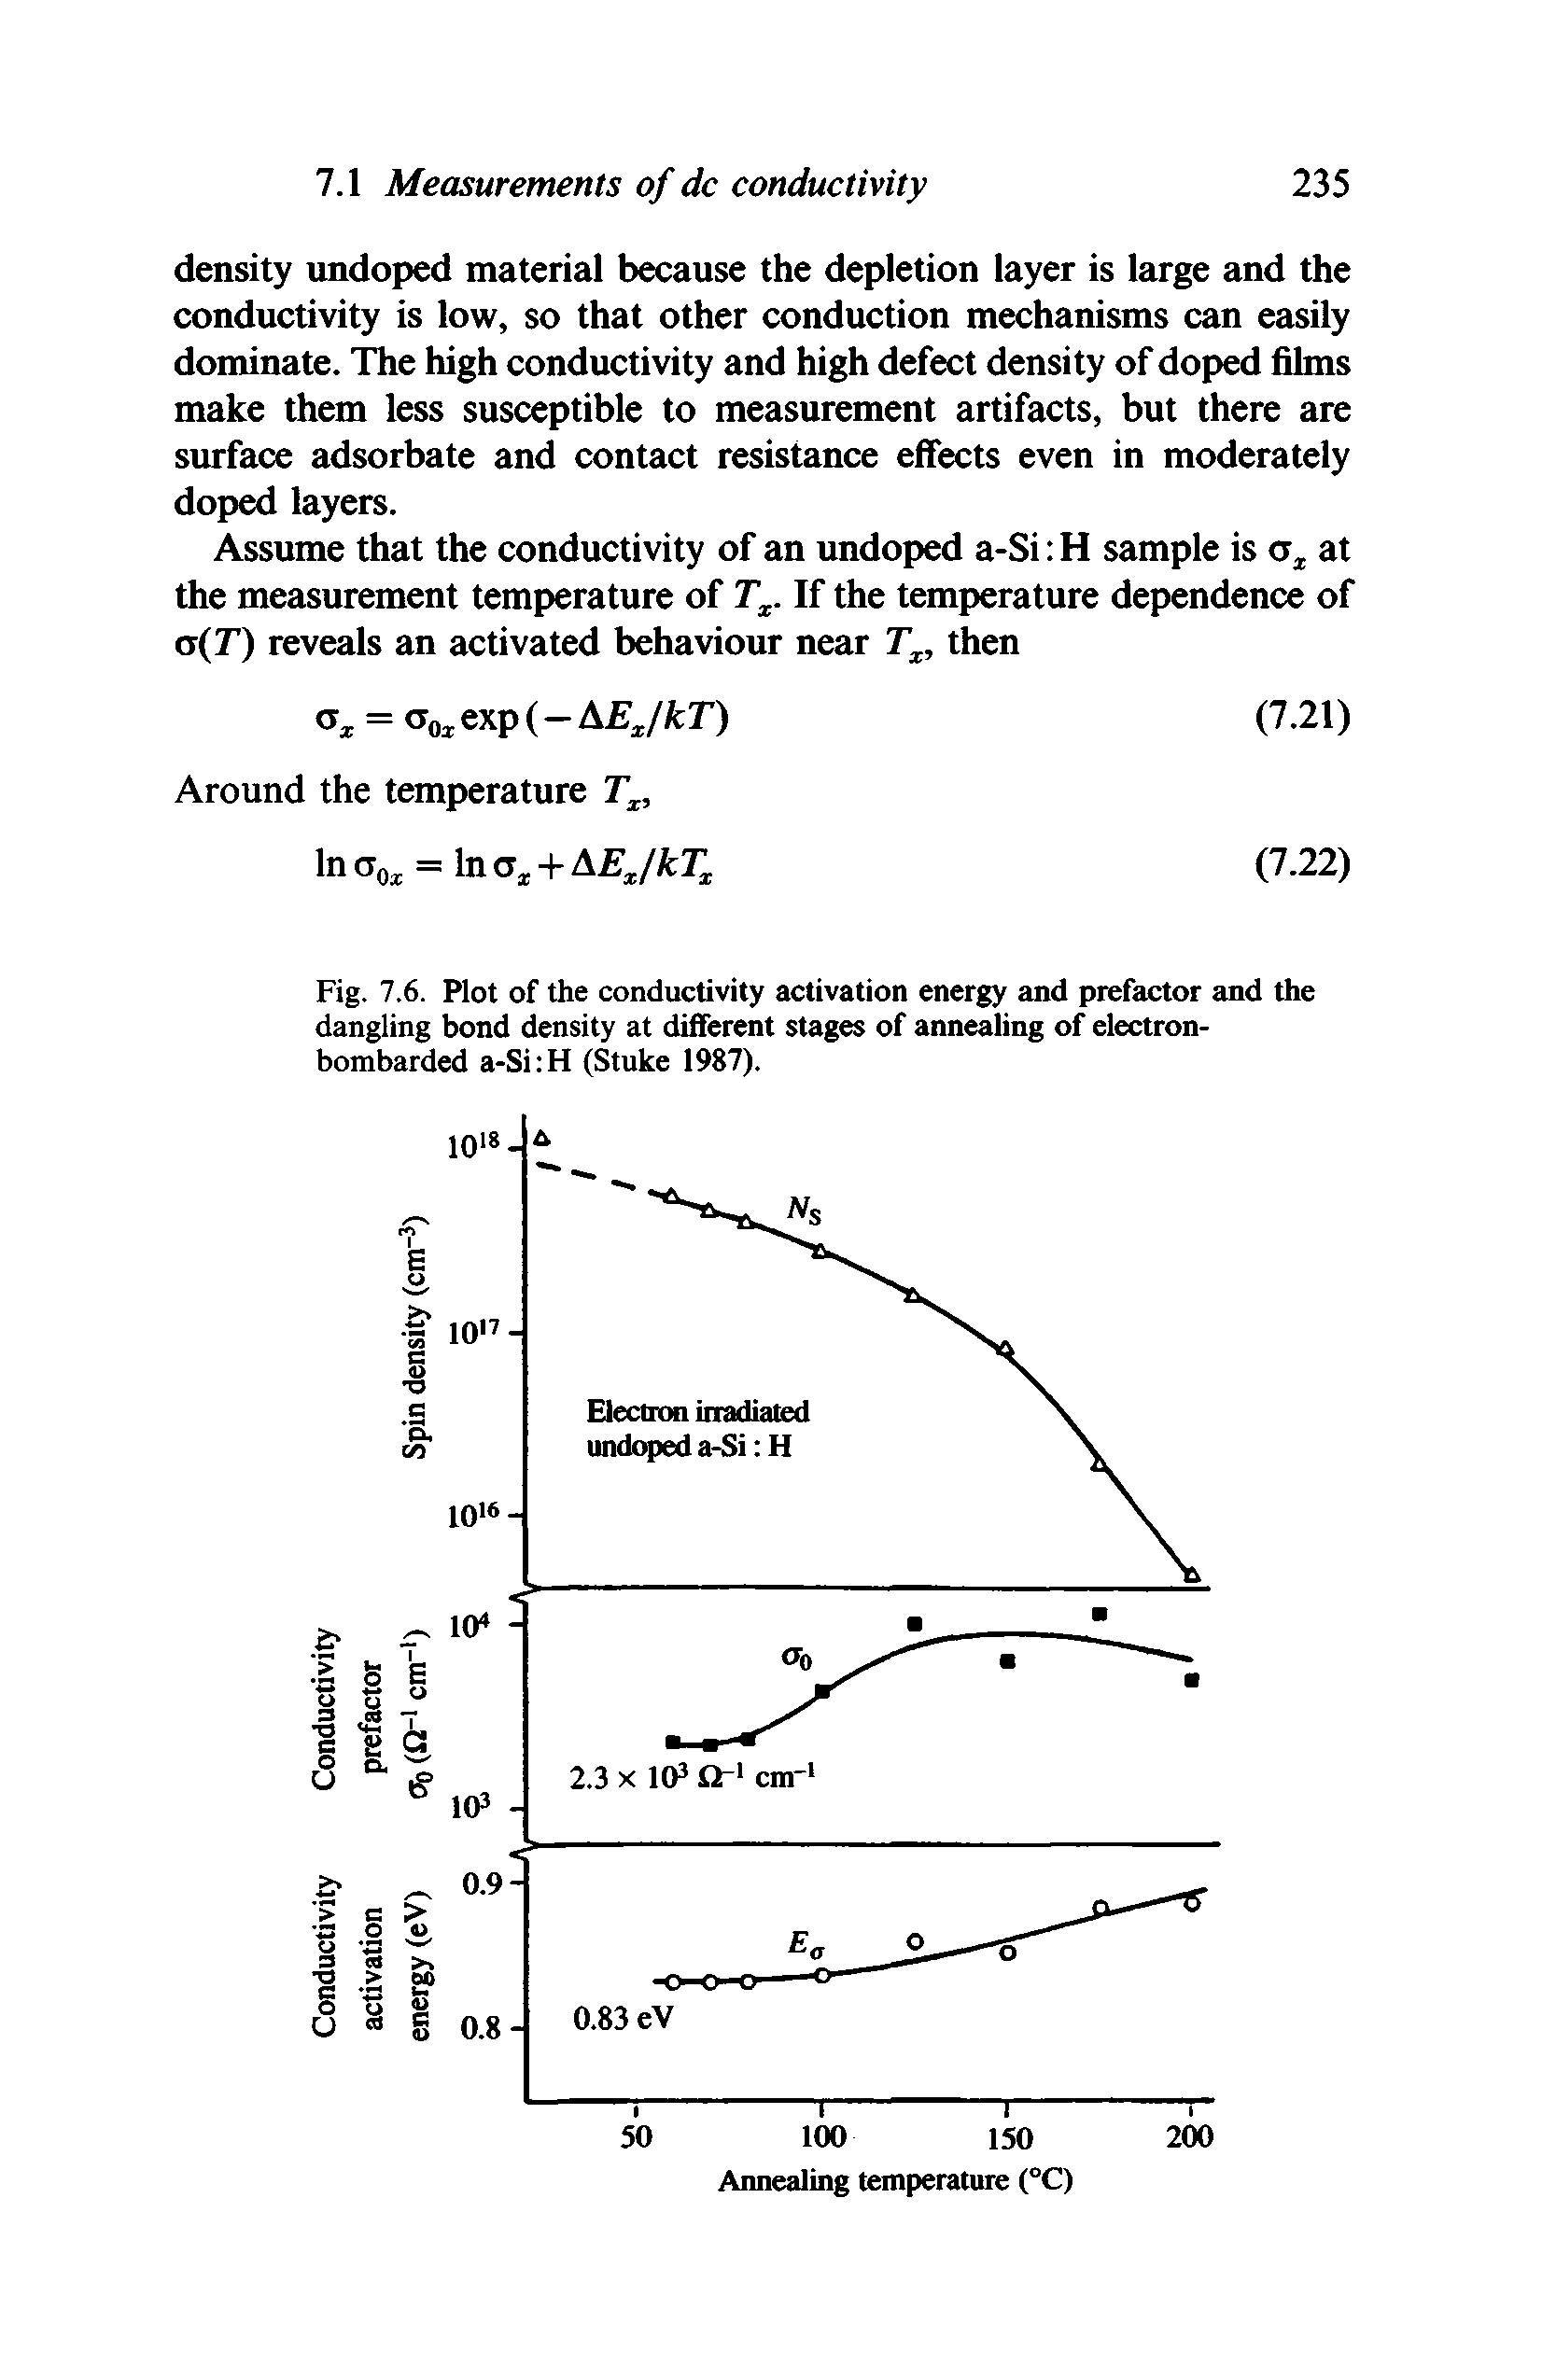 Fig. 7.6. Plot of the conductivity activation energy and prefactor and the dangling bond density at different stages of annealing of electron-bombarded a-Si H (Stuke 1987).